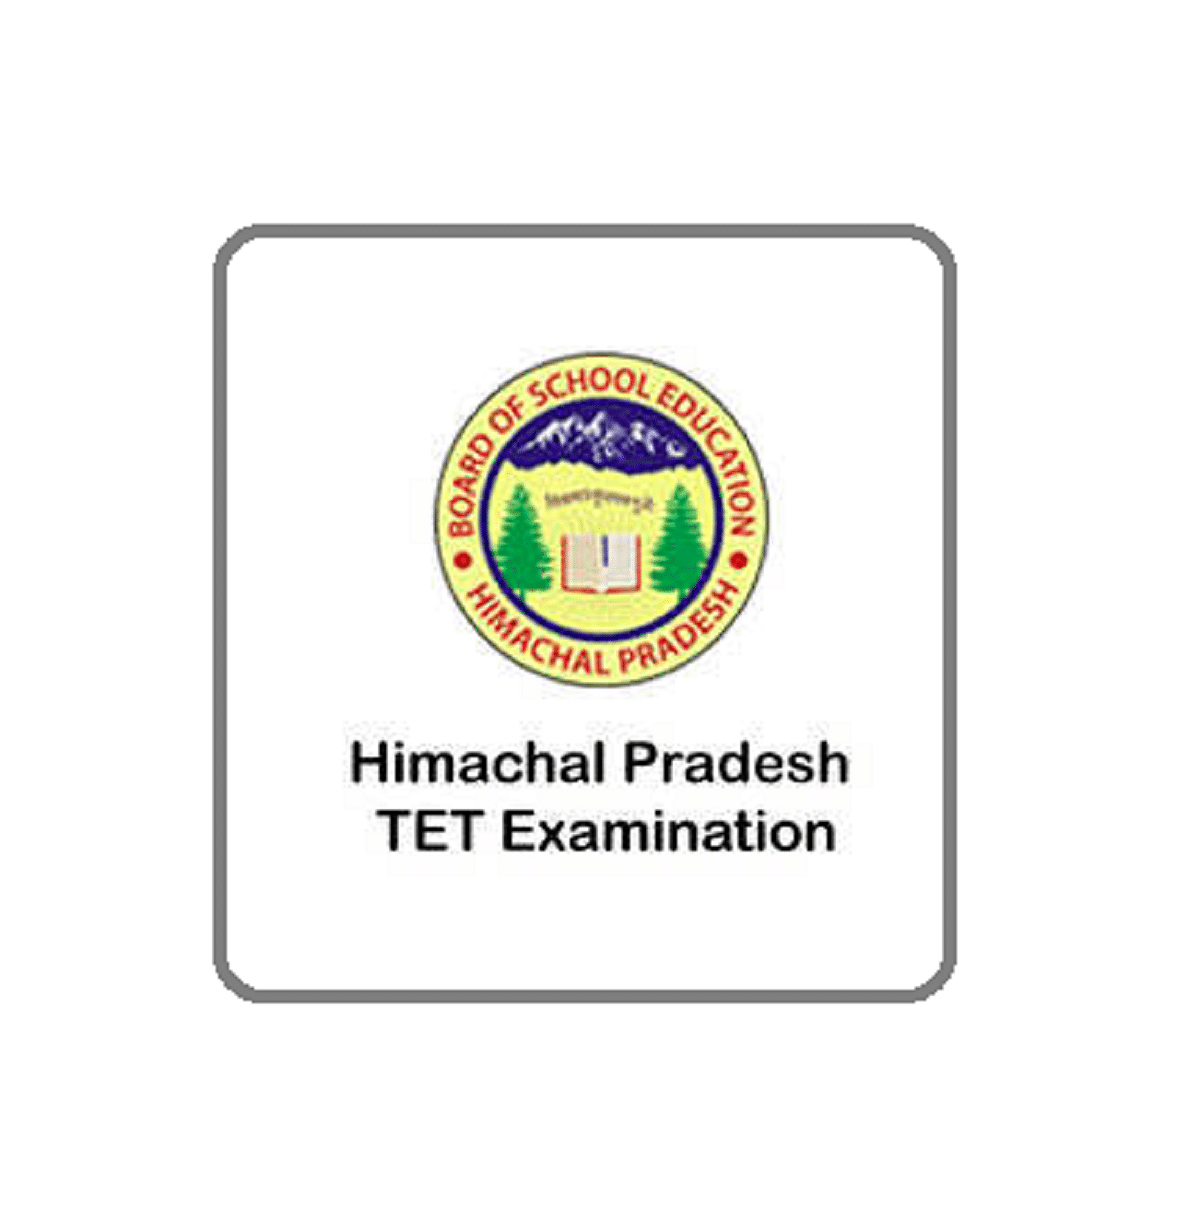 HP TET 2020: Revised Exam Dates Announced, Check Here